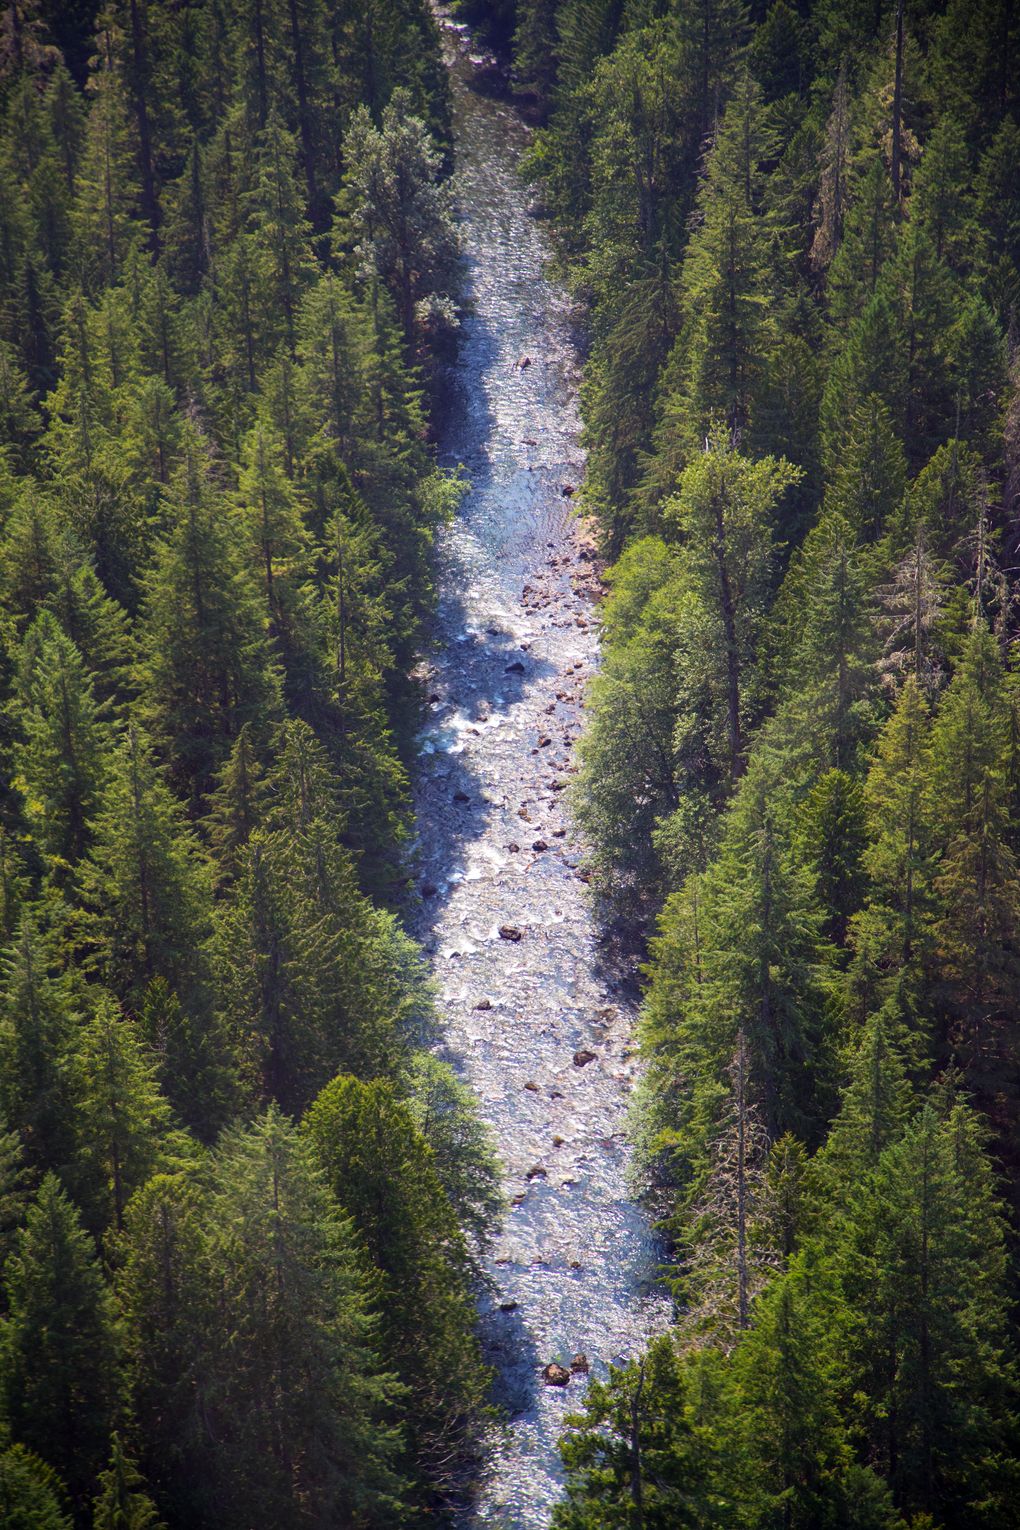 The headwaters of the Skagit River in British Columbia feed one of Washington’s most productive rivers for salmon. Conservationists fear recent logging in the area will open the door to mining down the road. Members of an international commission, created in 1984, see resource extraction here as a violation of the spirit of a treaty between the U.S. and Canada. (Mike Siegel/The Seattle Times)